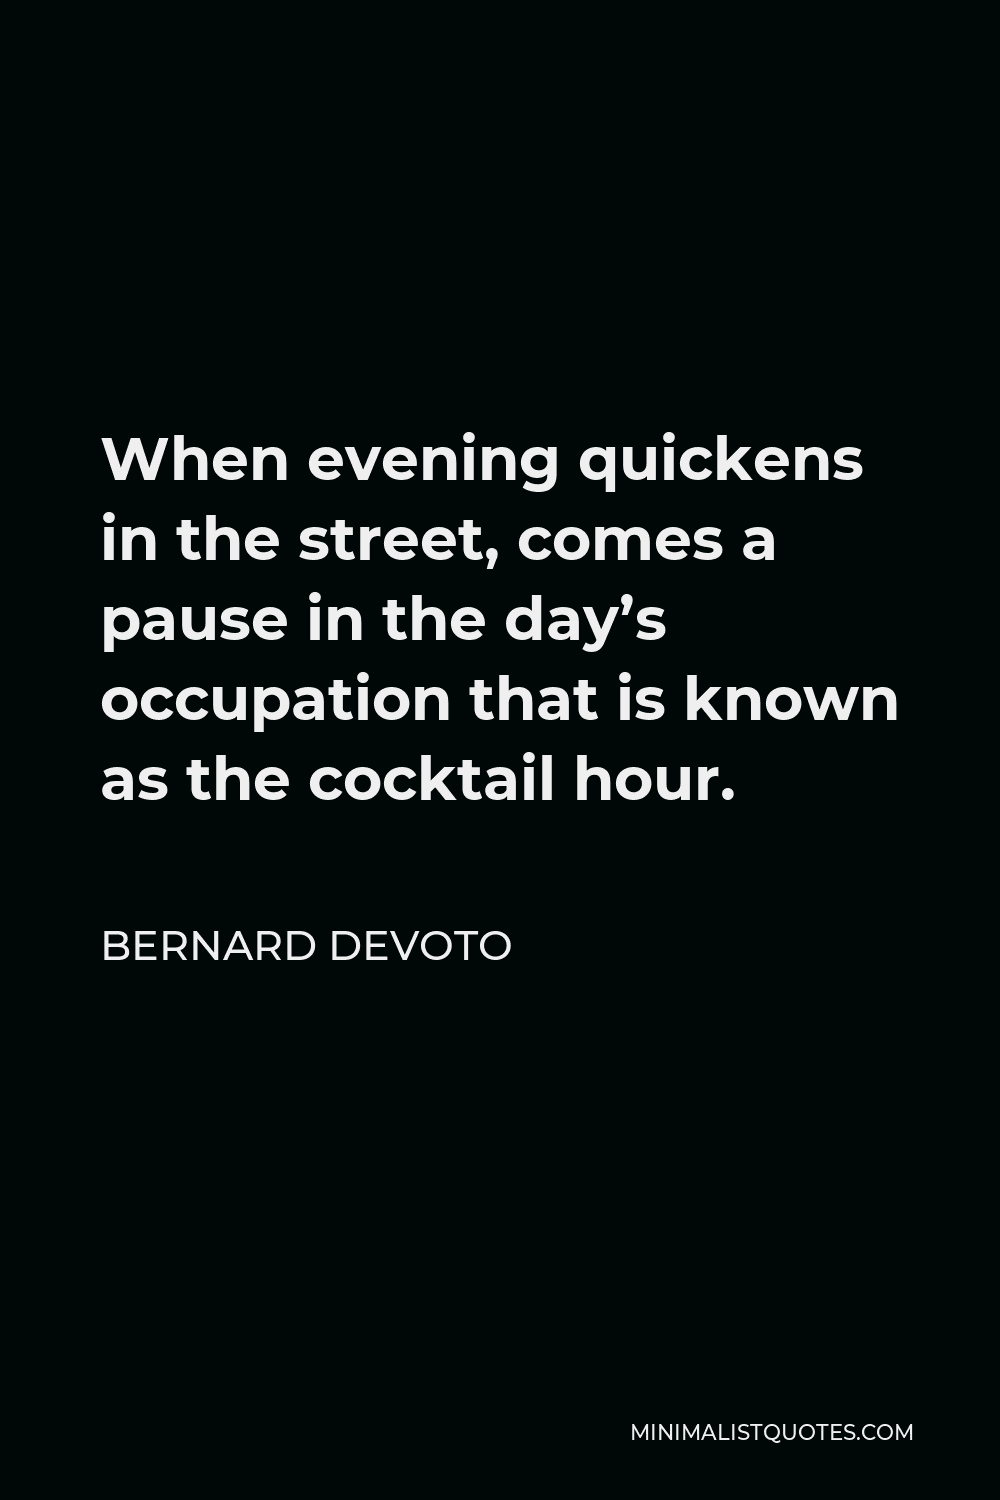 Bernard DeVoto Quote - When evening quickens in the street, comes a pause in the day’s occupation that is known as the cocktail hour.